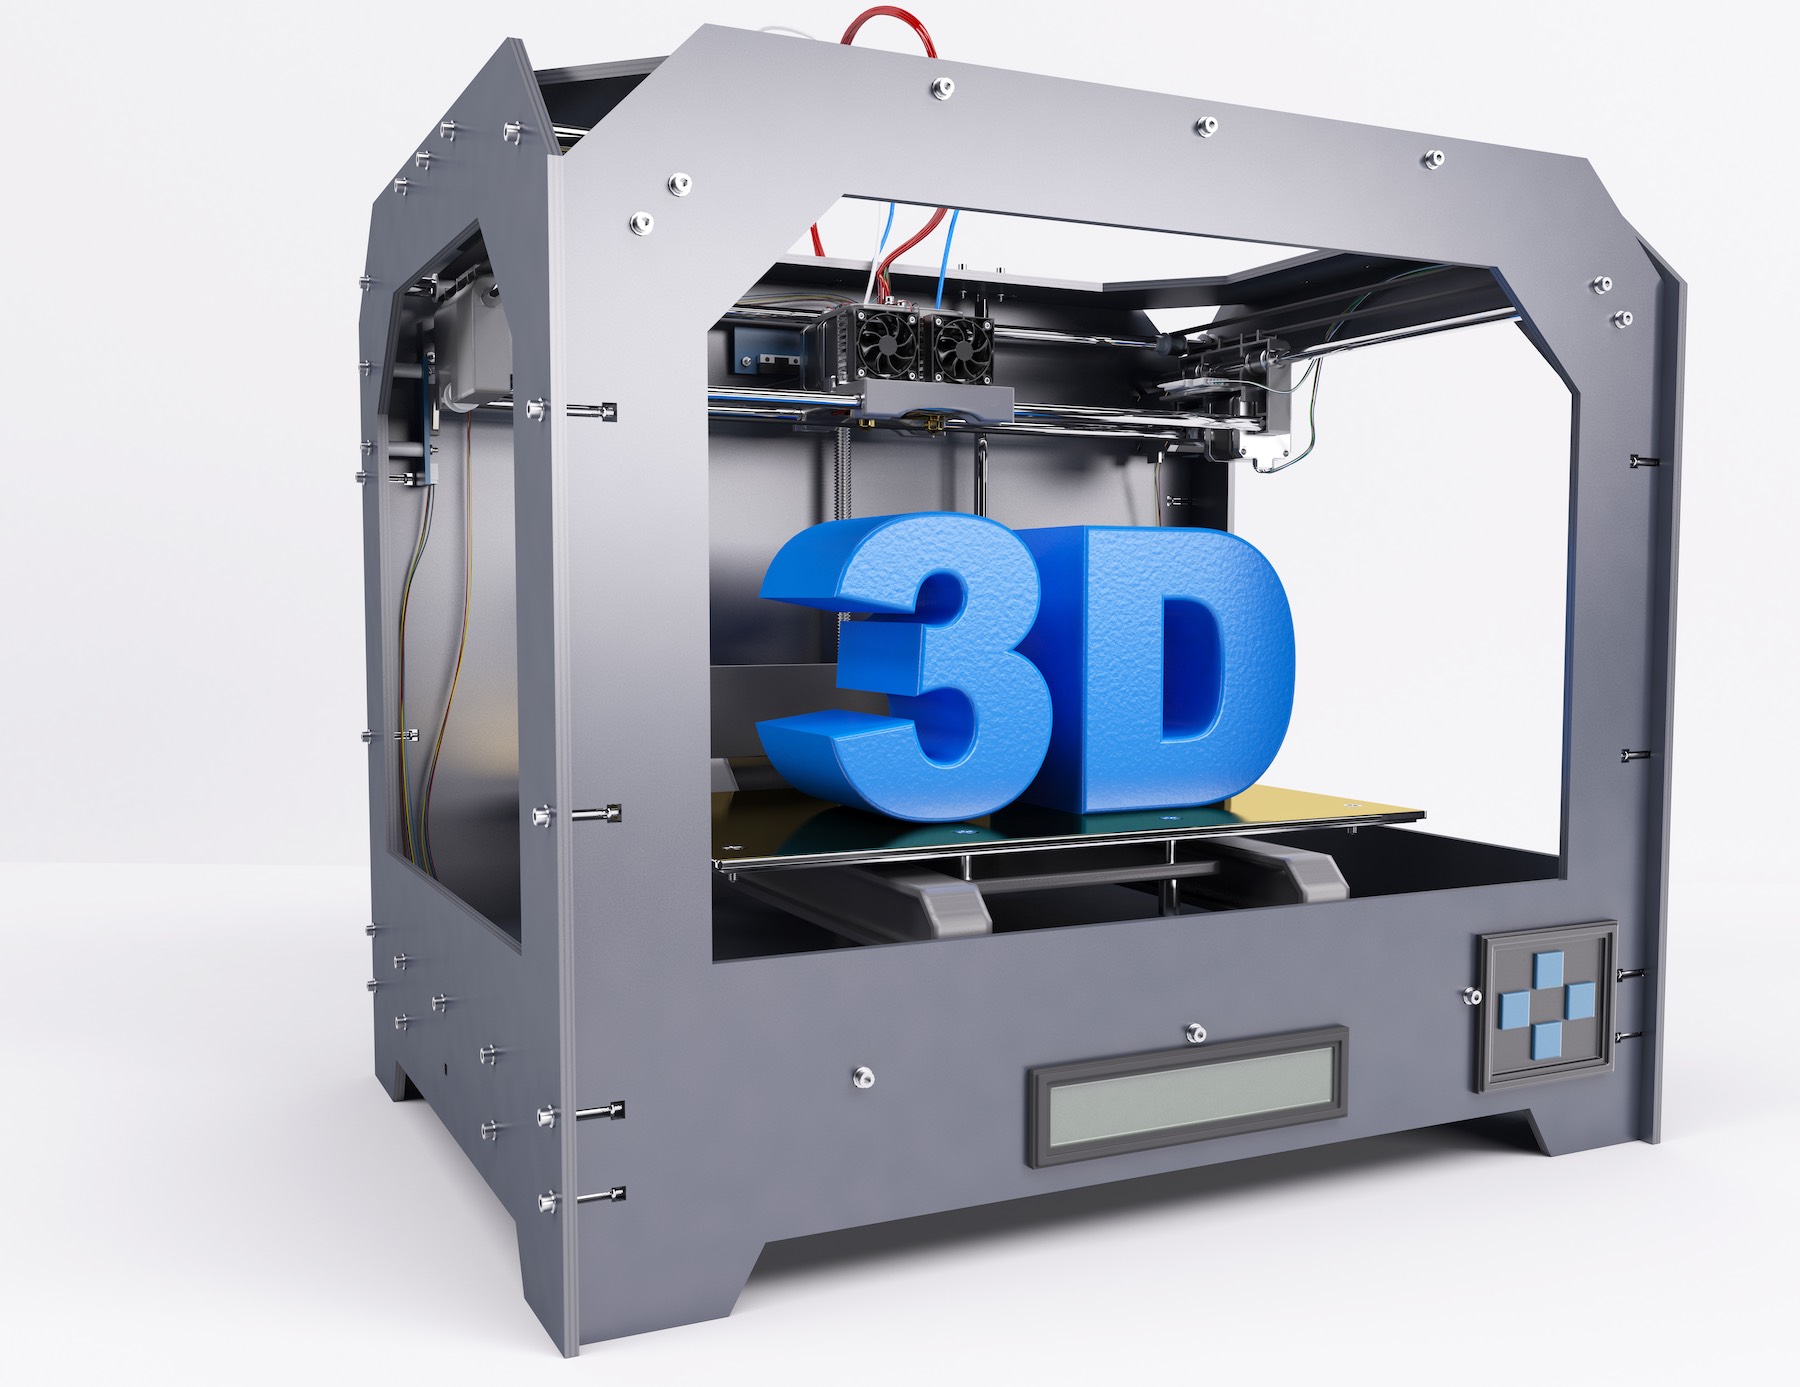 Is Electric 3D Printing the Way of the Future – Taking a Look at this Bold New Concept